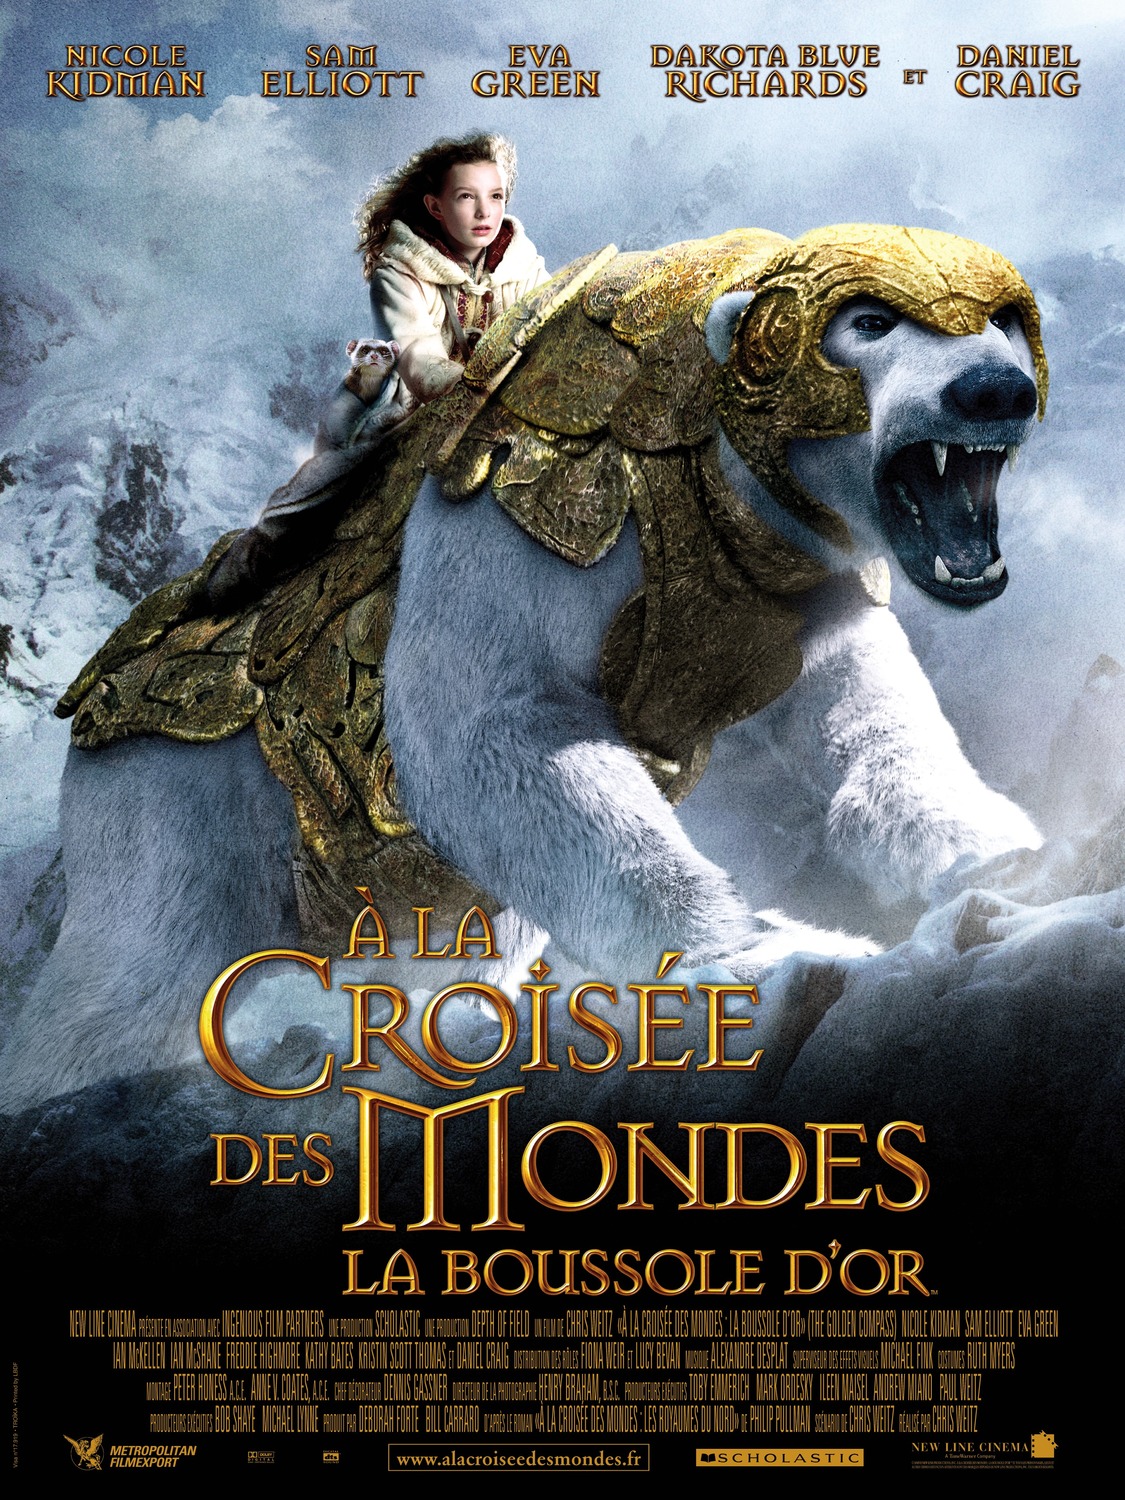 Extra Large Movie Poster Image for The Golden Compass (#9 of 27)